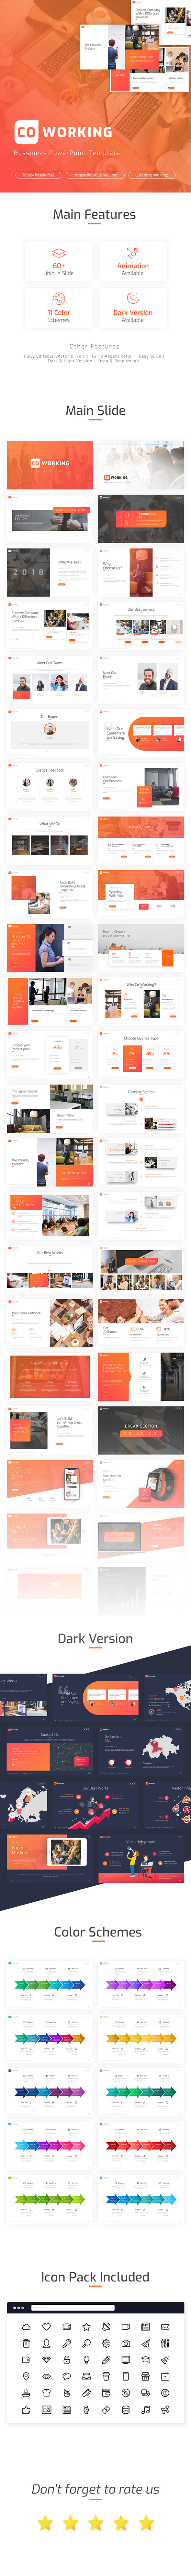 Coworking - Professional Powerpoint Template